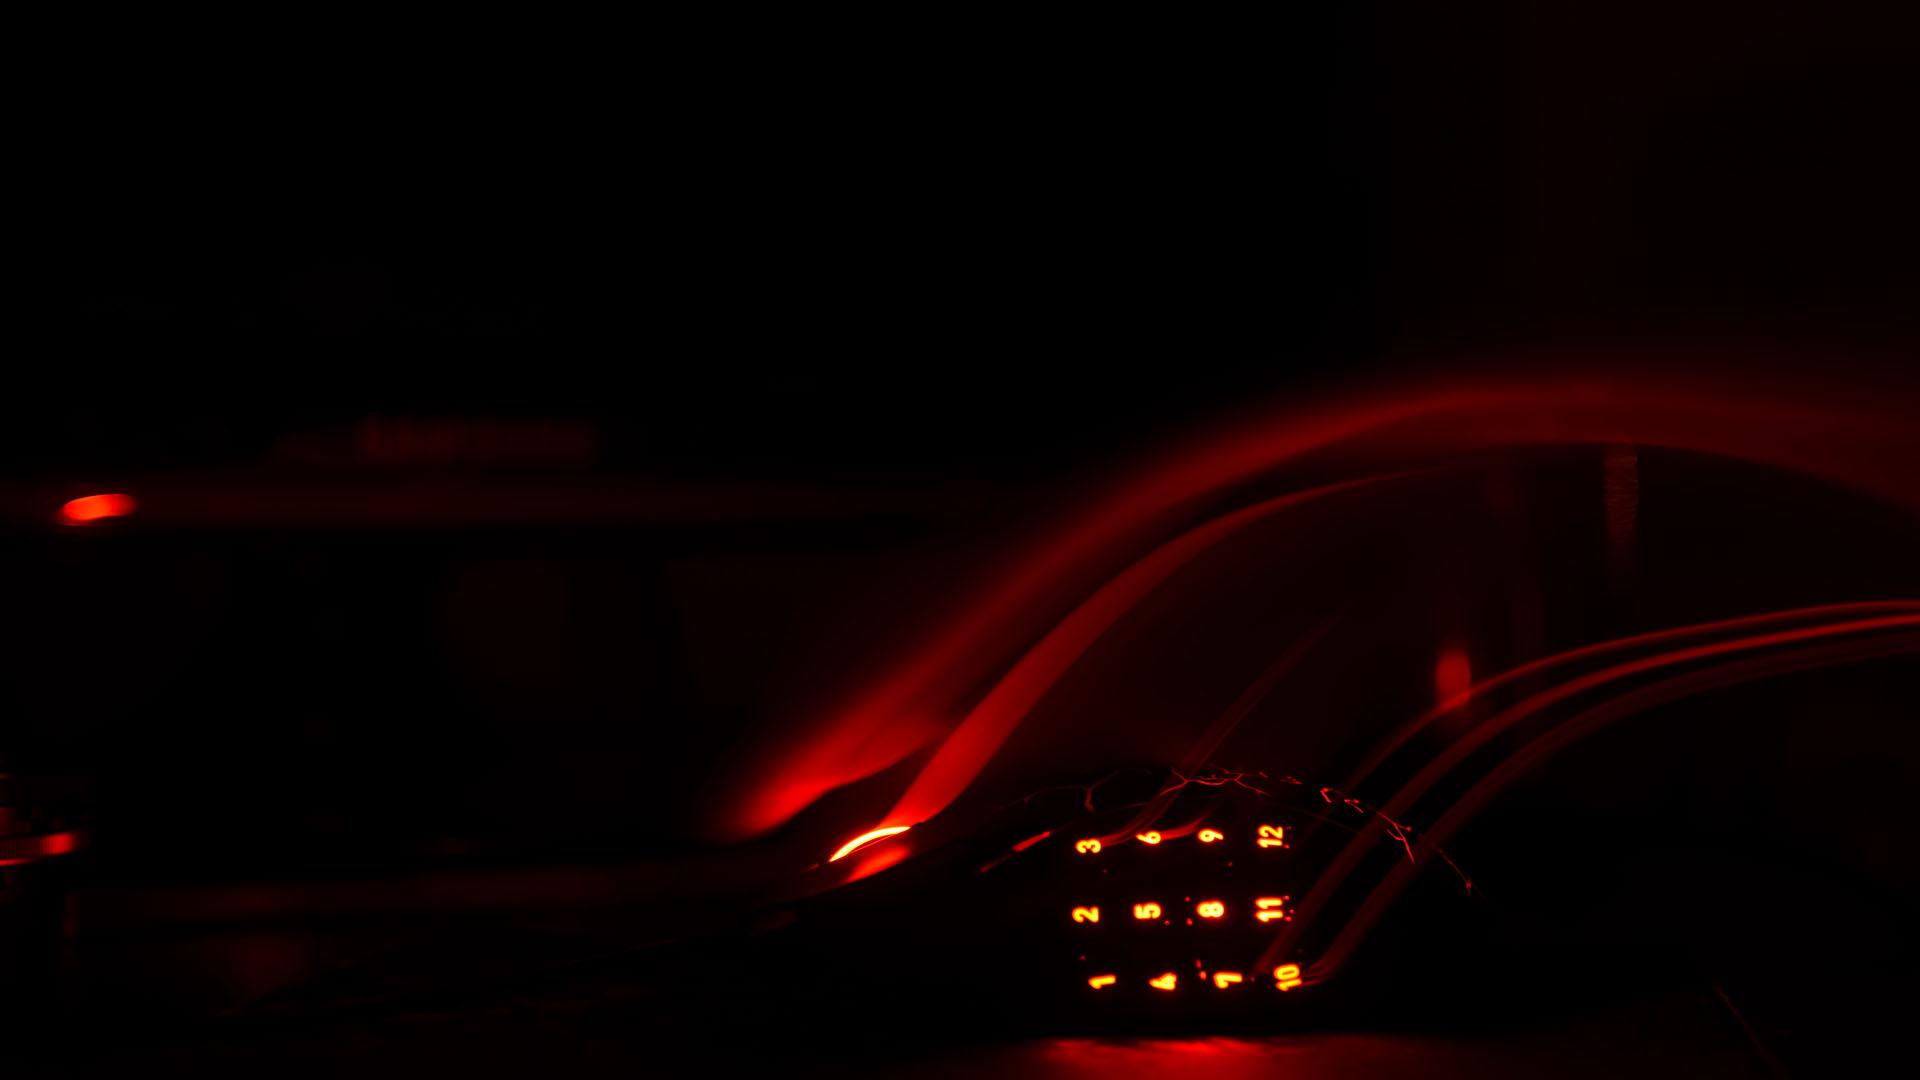 Took this picture yesterday of my Razer Naga Molten Edition